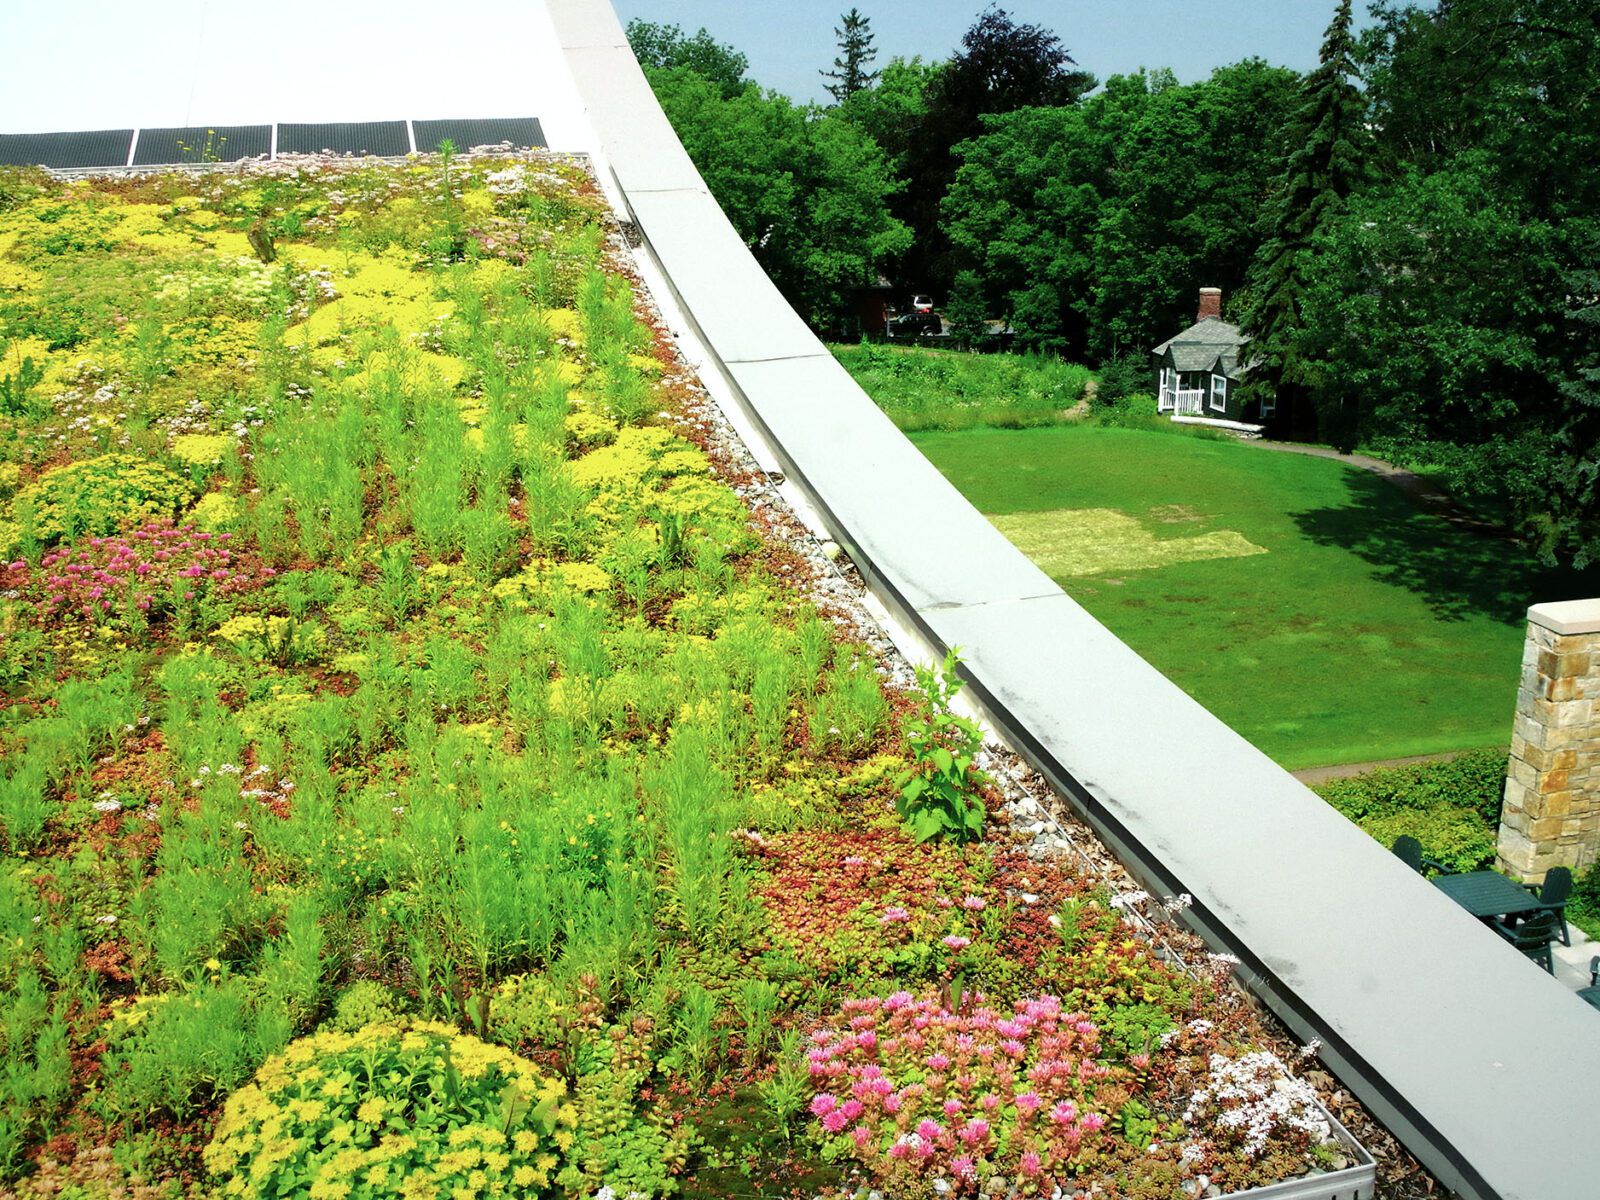 green roof on top of perry hall full of colorful plants